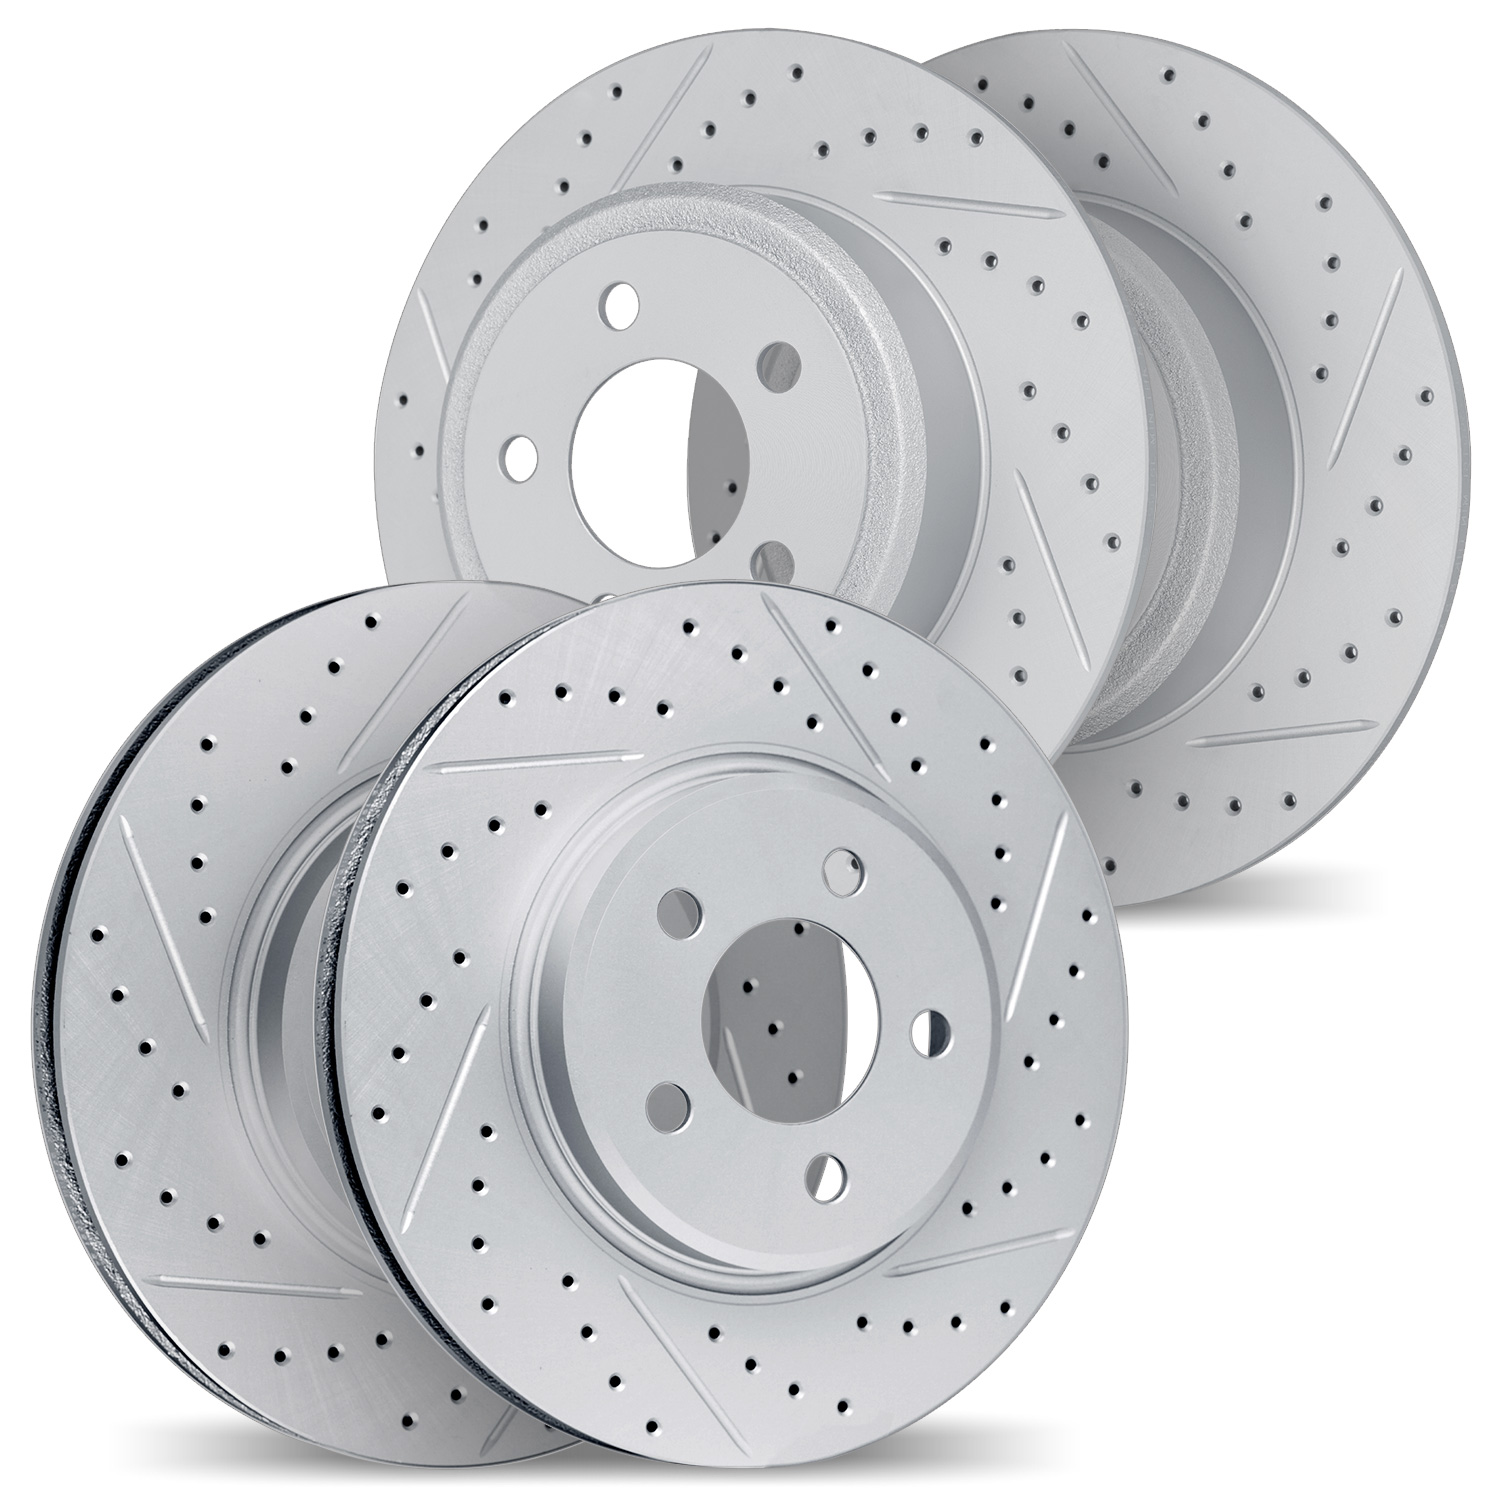 2004-54144 Geoperformance Drilled/Slotted Brake Rotors, 2006-2013 Ford/Lincoln/Mercury/Mazda, Position: Front and Rear